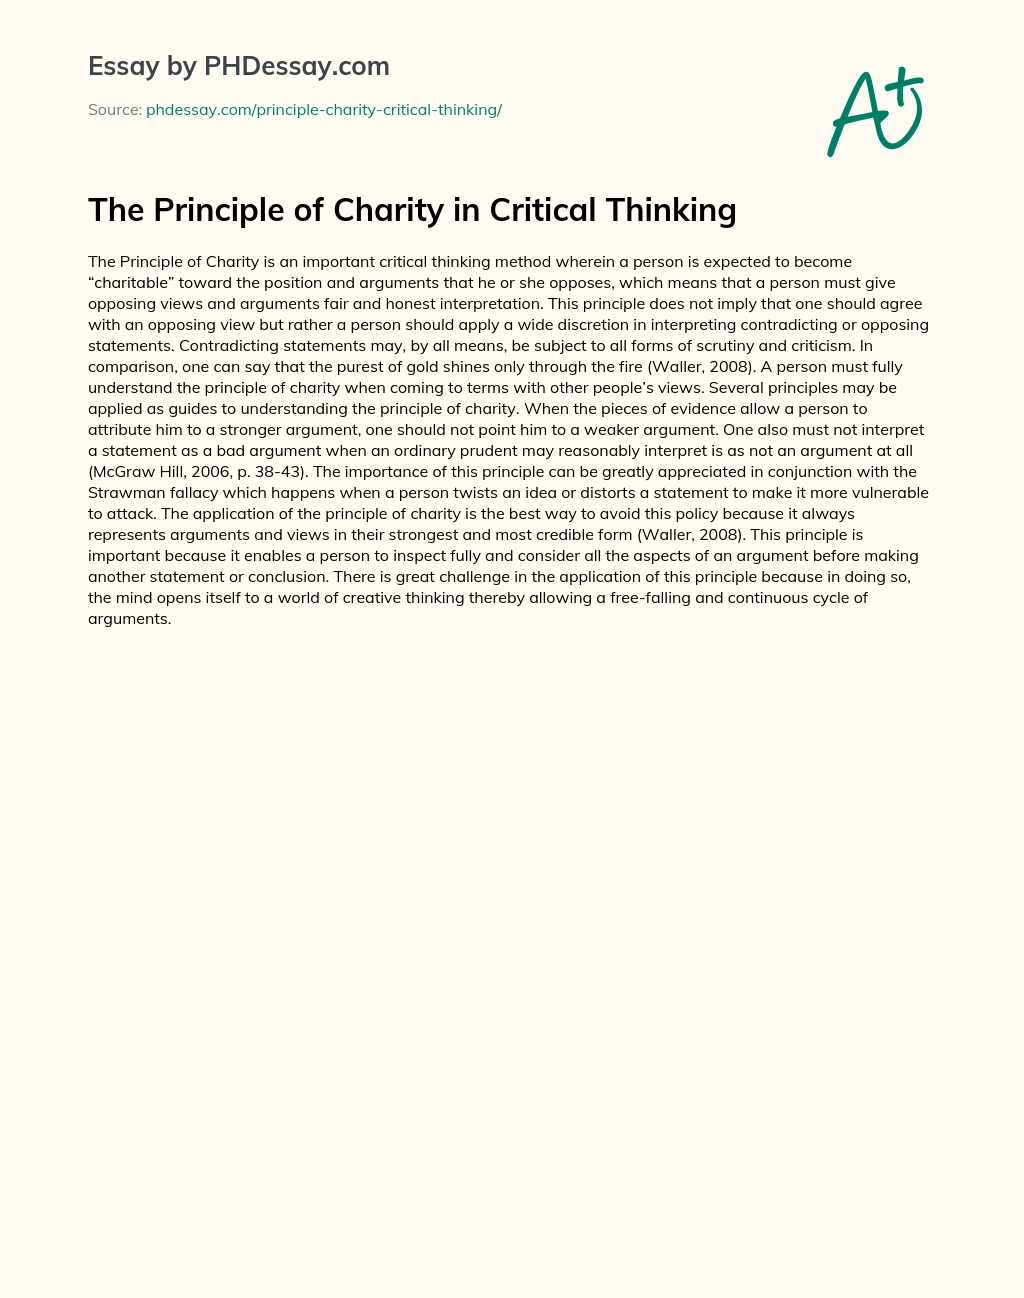 the principle of charity in critical thinking